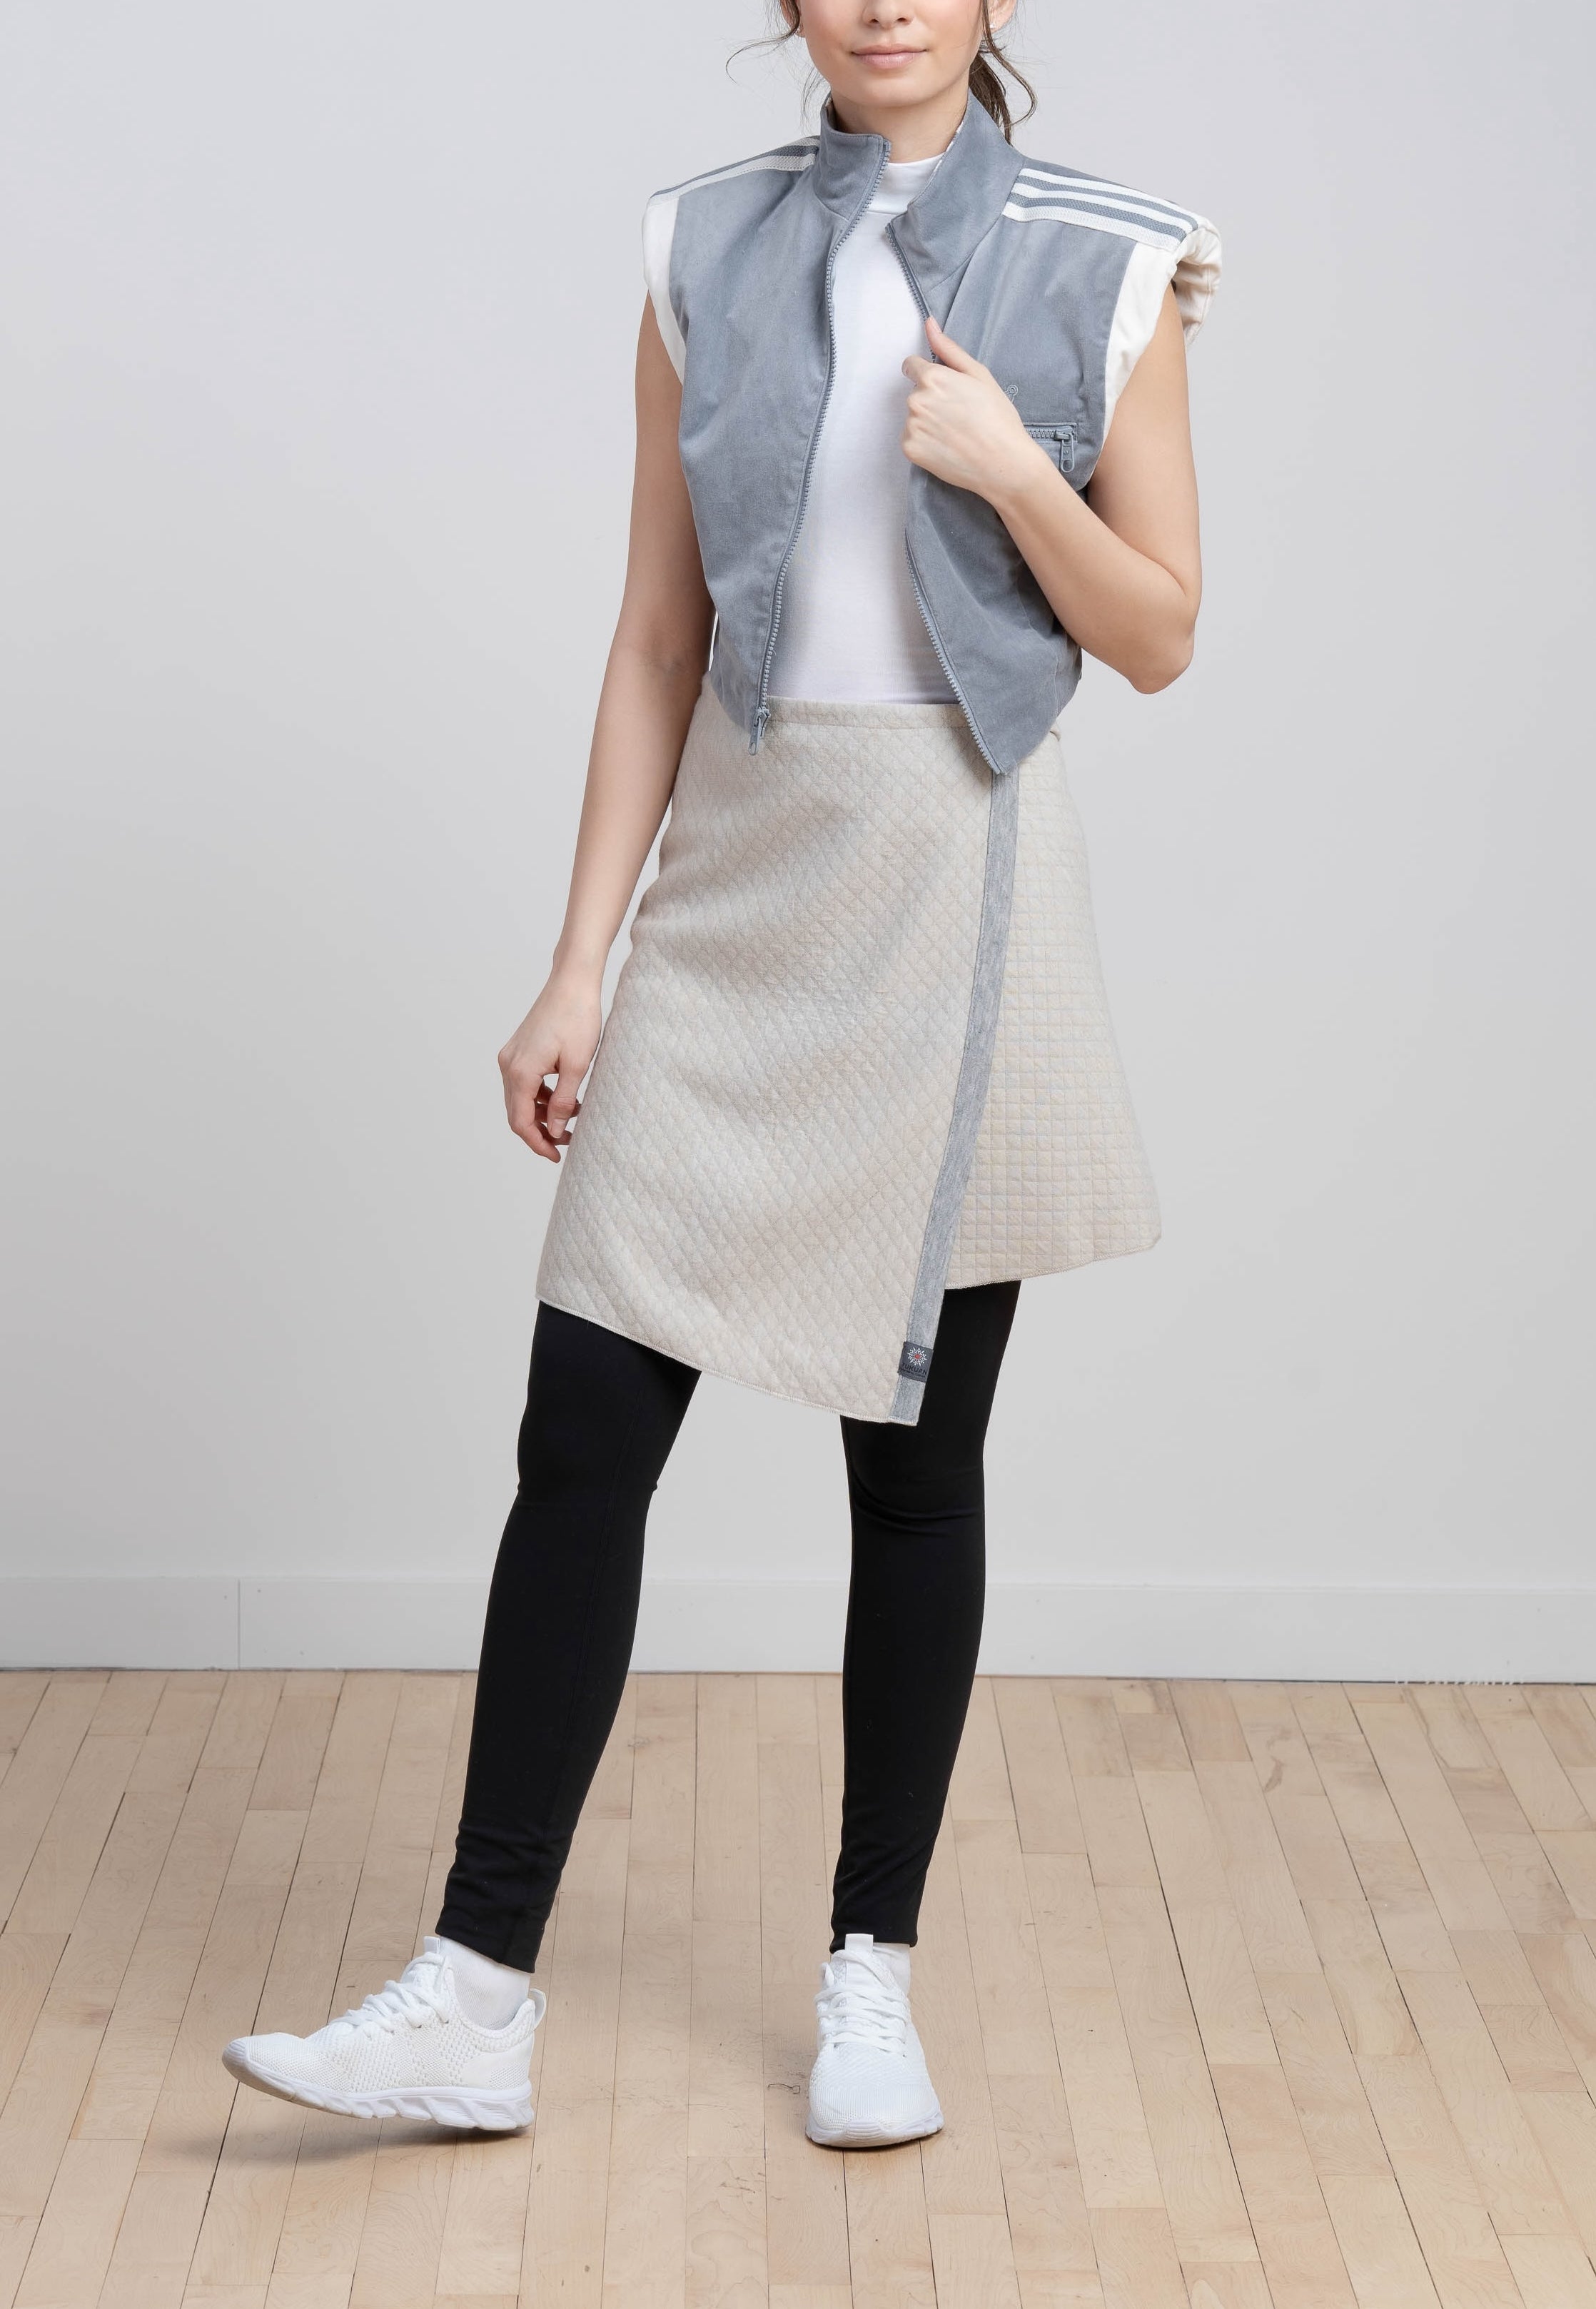 TUKUAN spring/summer lightweight overskirt with a casual sporty or 